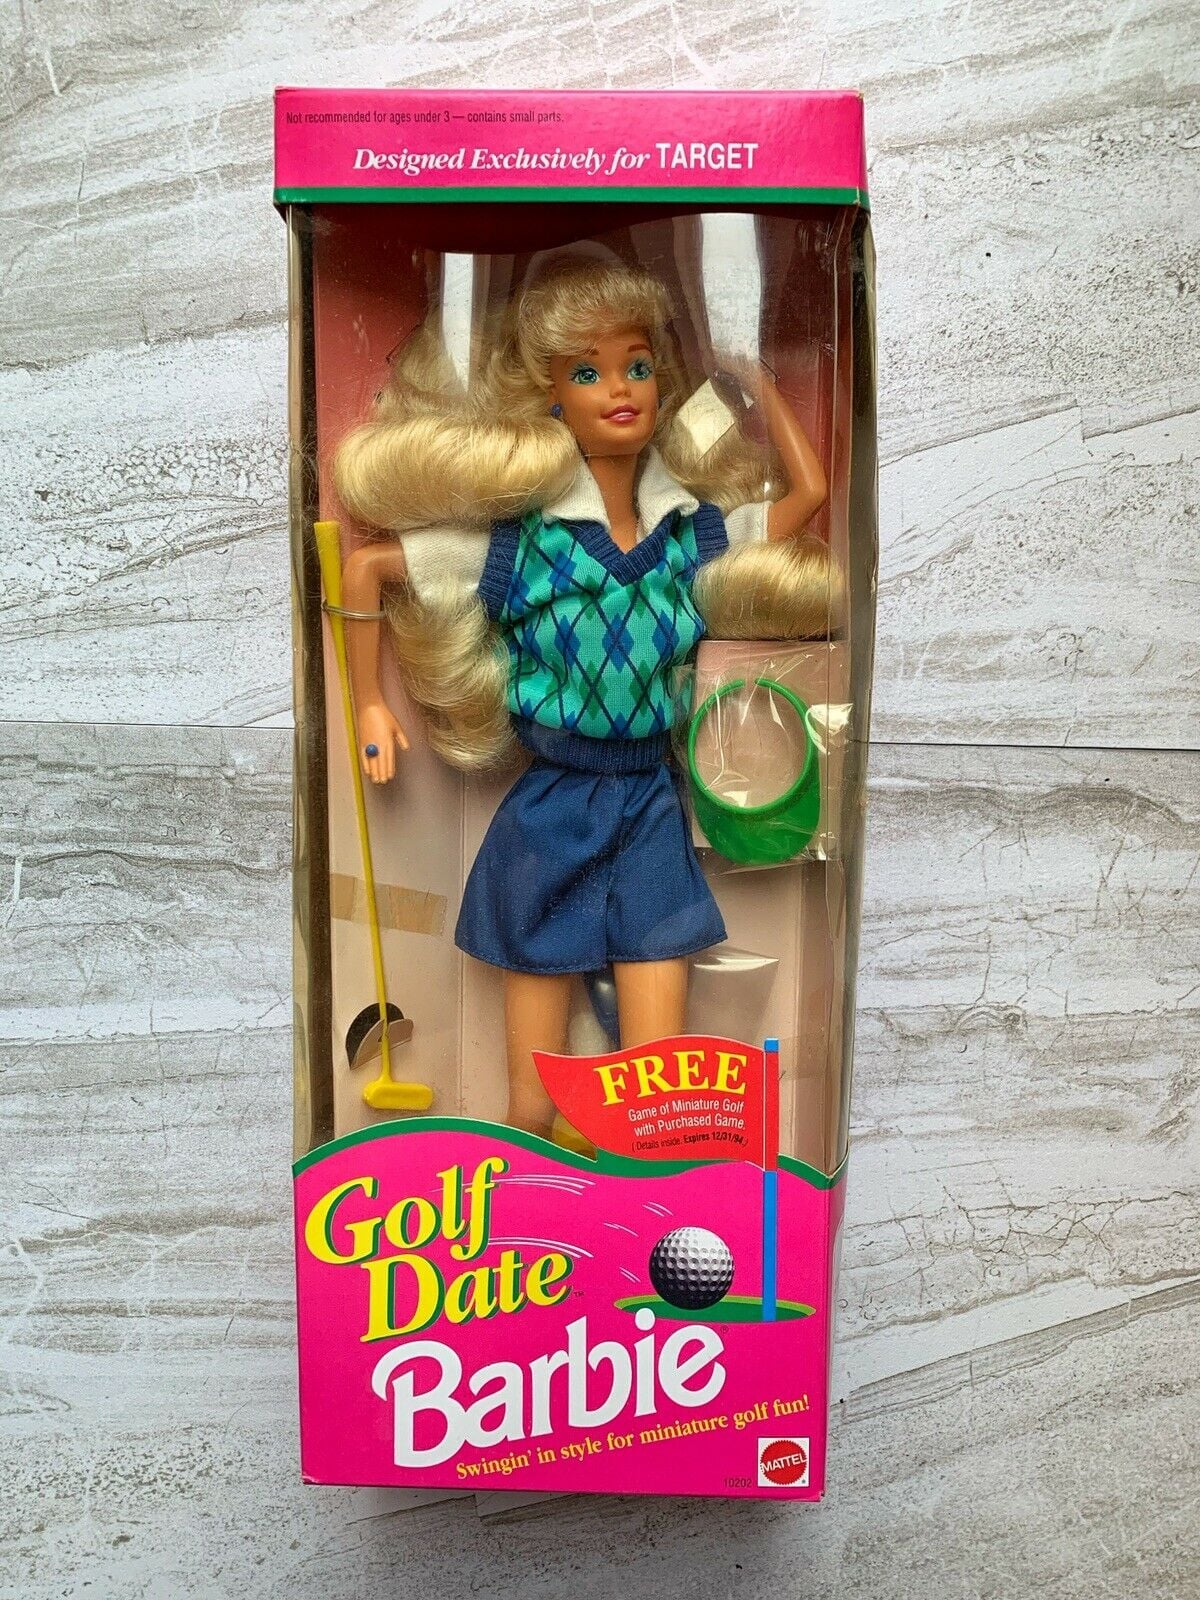 Flitsend Wegrijden Profeet Golf Date Barbie Doll | Every '90s Kid Will Remember These Old-School  Barbies From Back in the Day | POPSUGAR Smart Living Photo 25